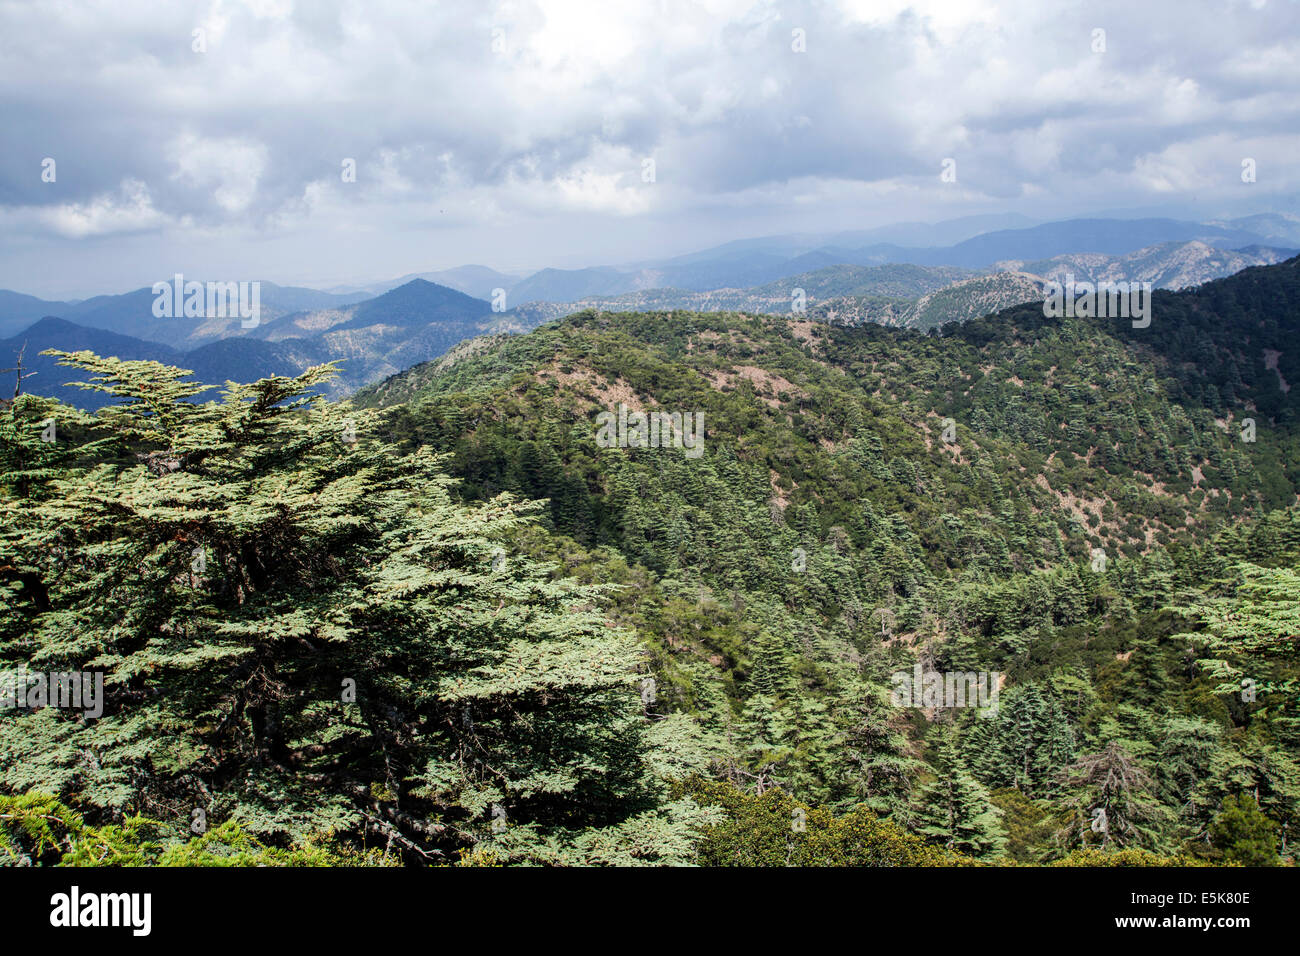 Cyprus, Troodos mountains, landscape Stock Photo